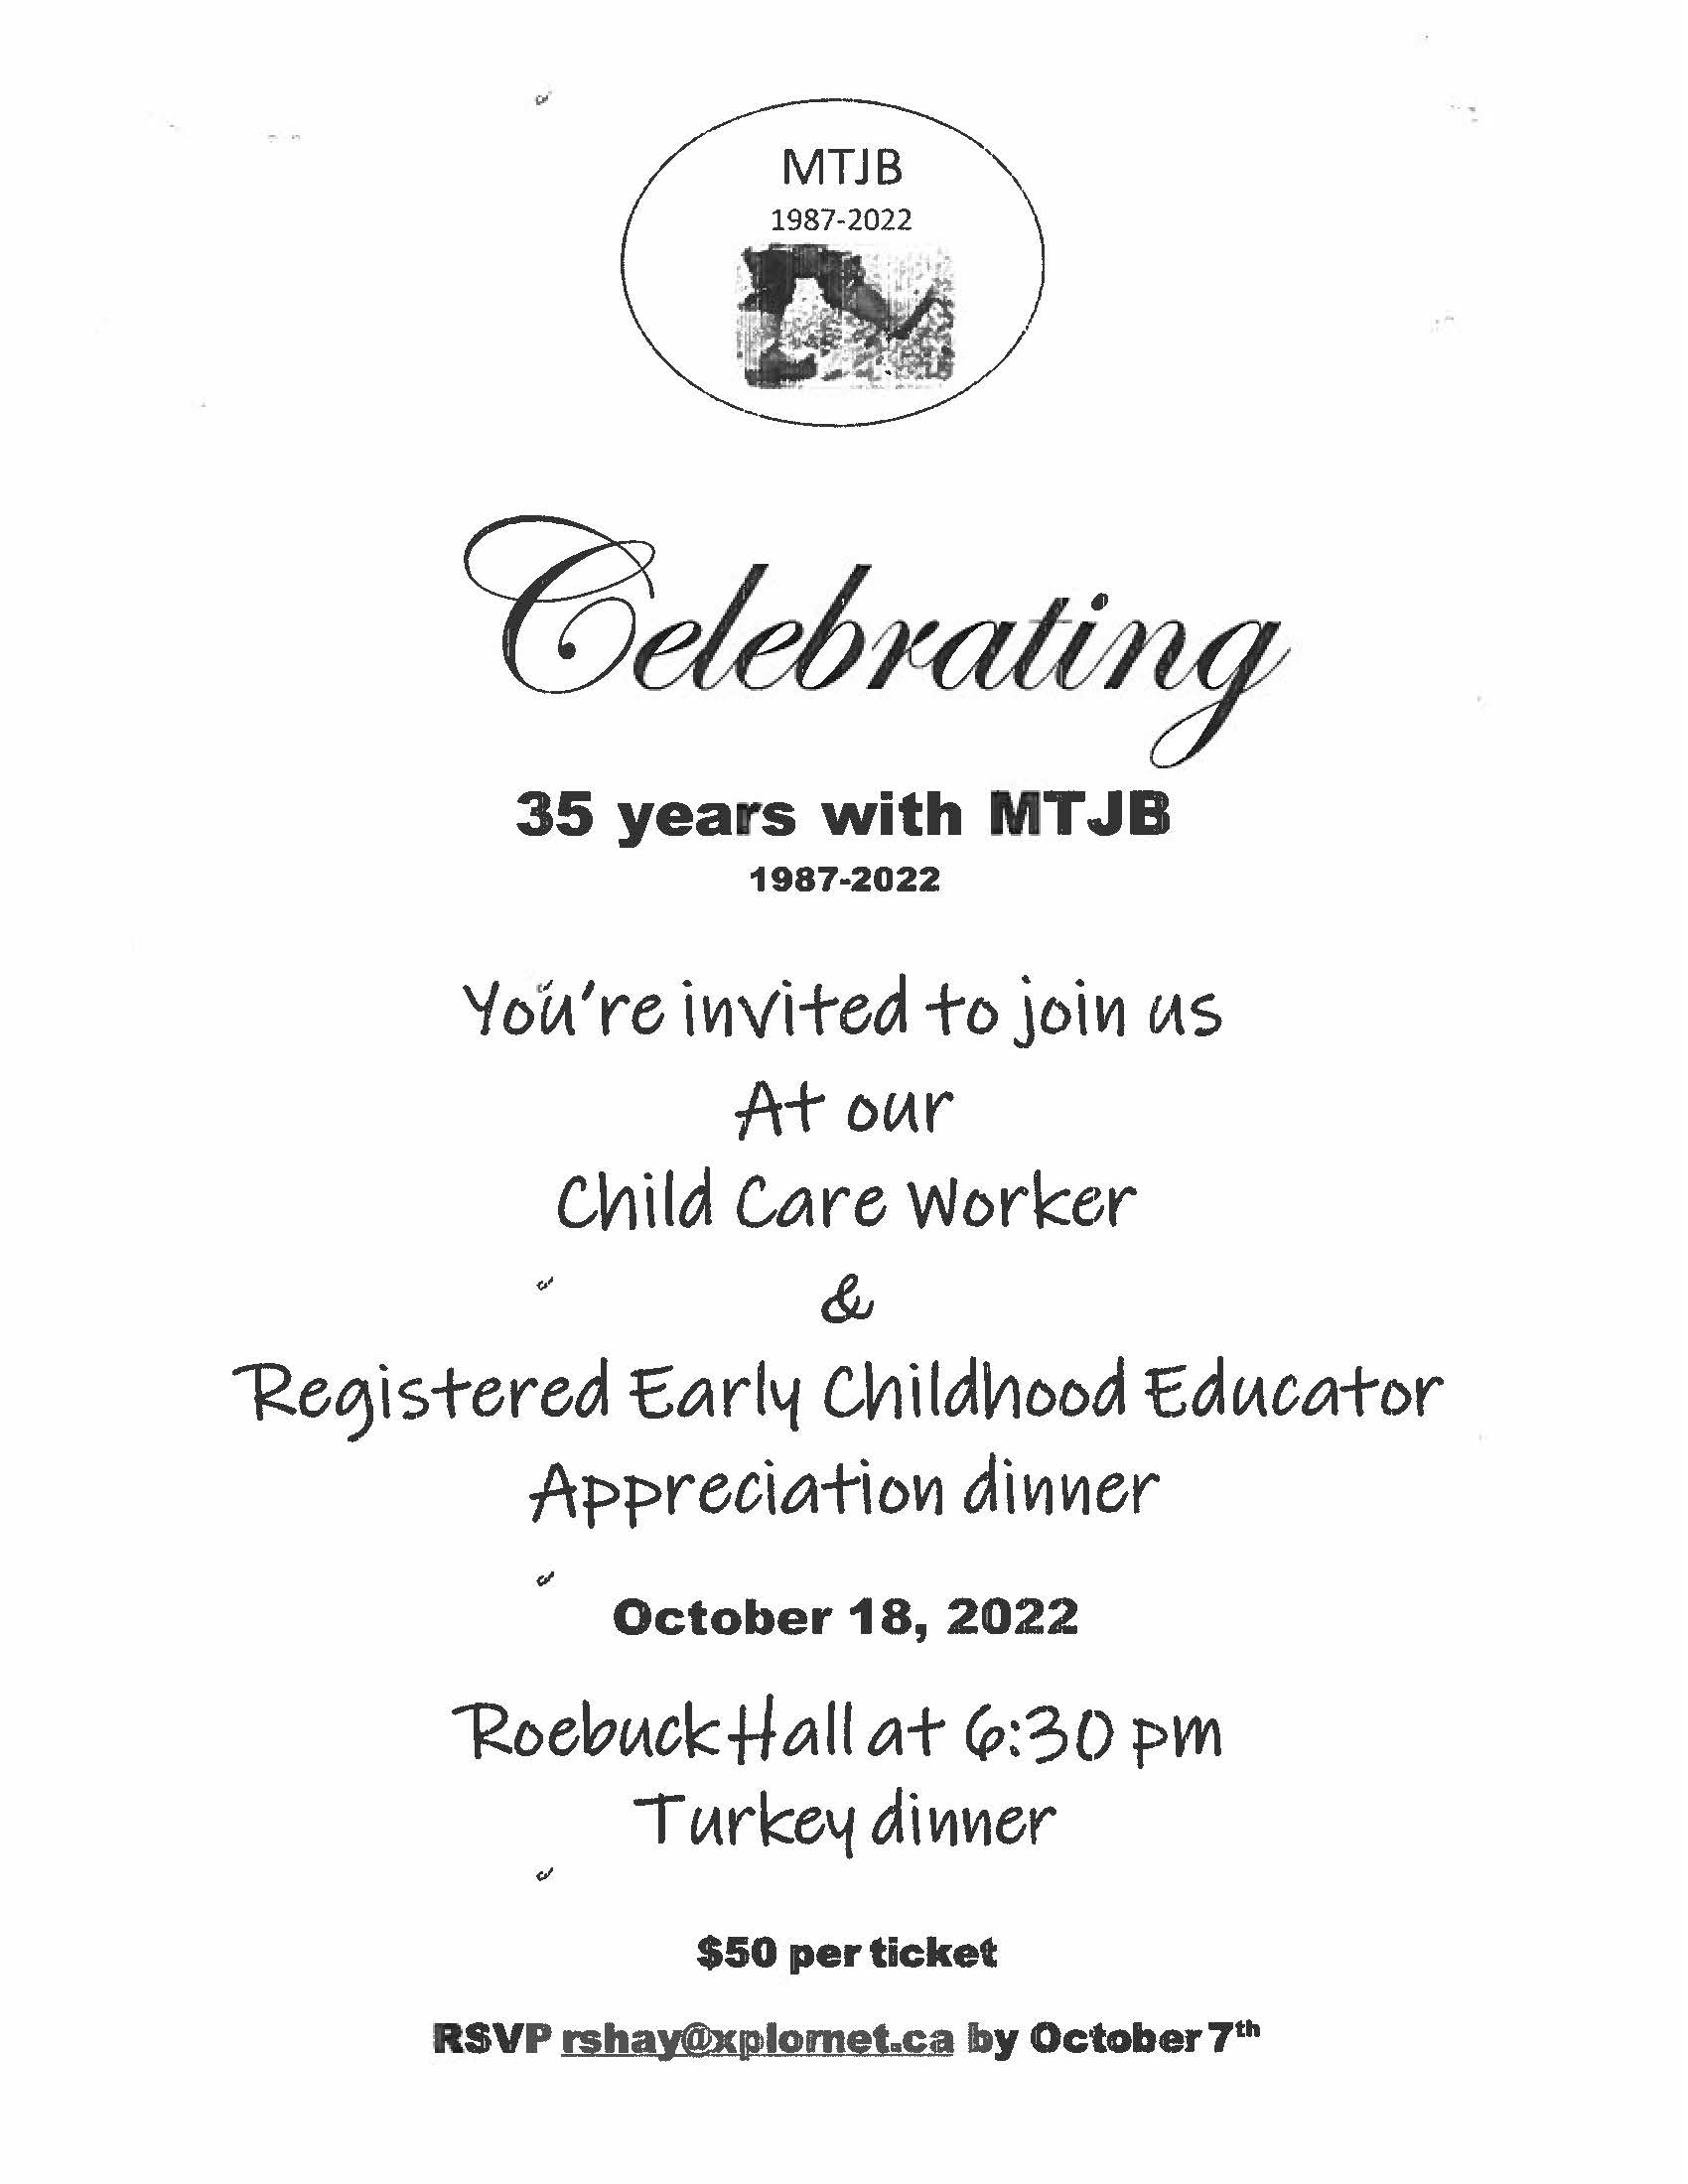 Child Care Worker & Registered Early Childhood Educator Appreciation Dinner @ Roebuck Community Centre | Spencerville | Ontario | Canada